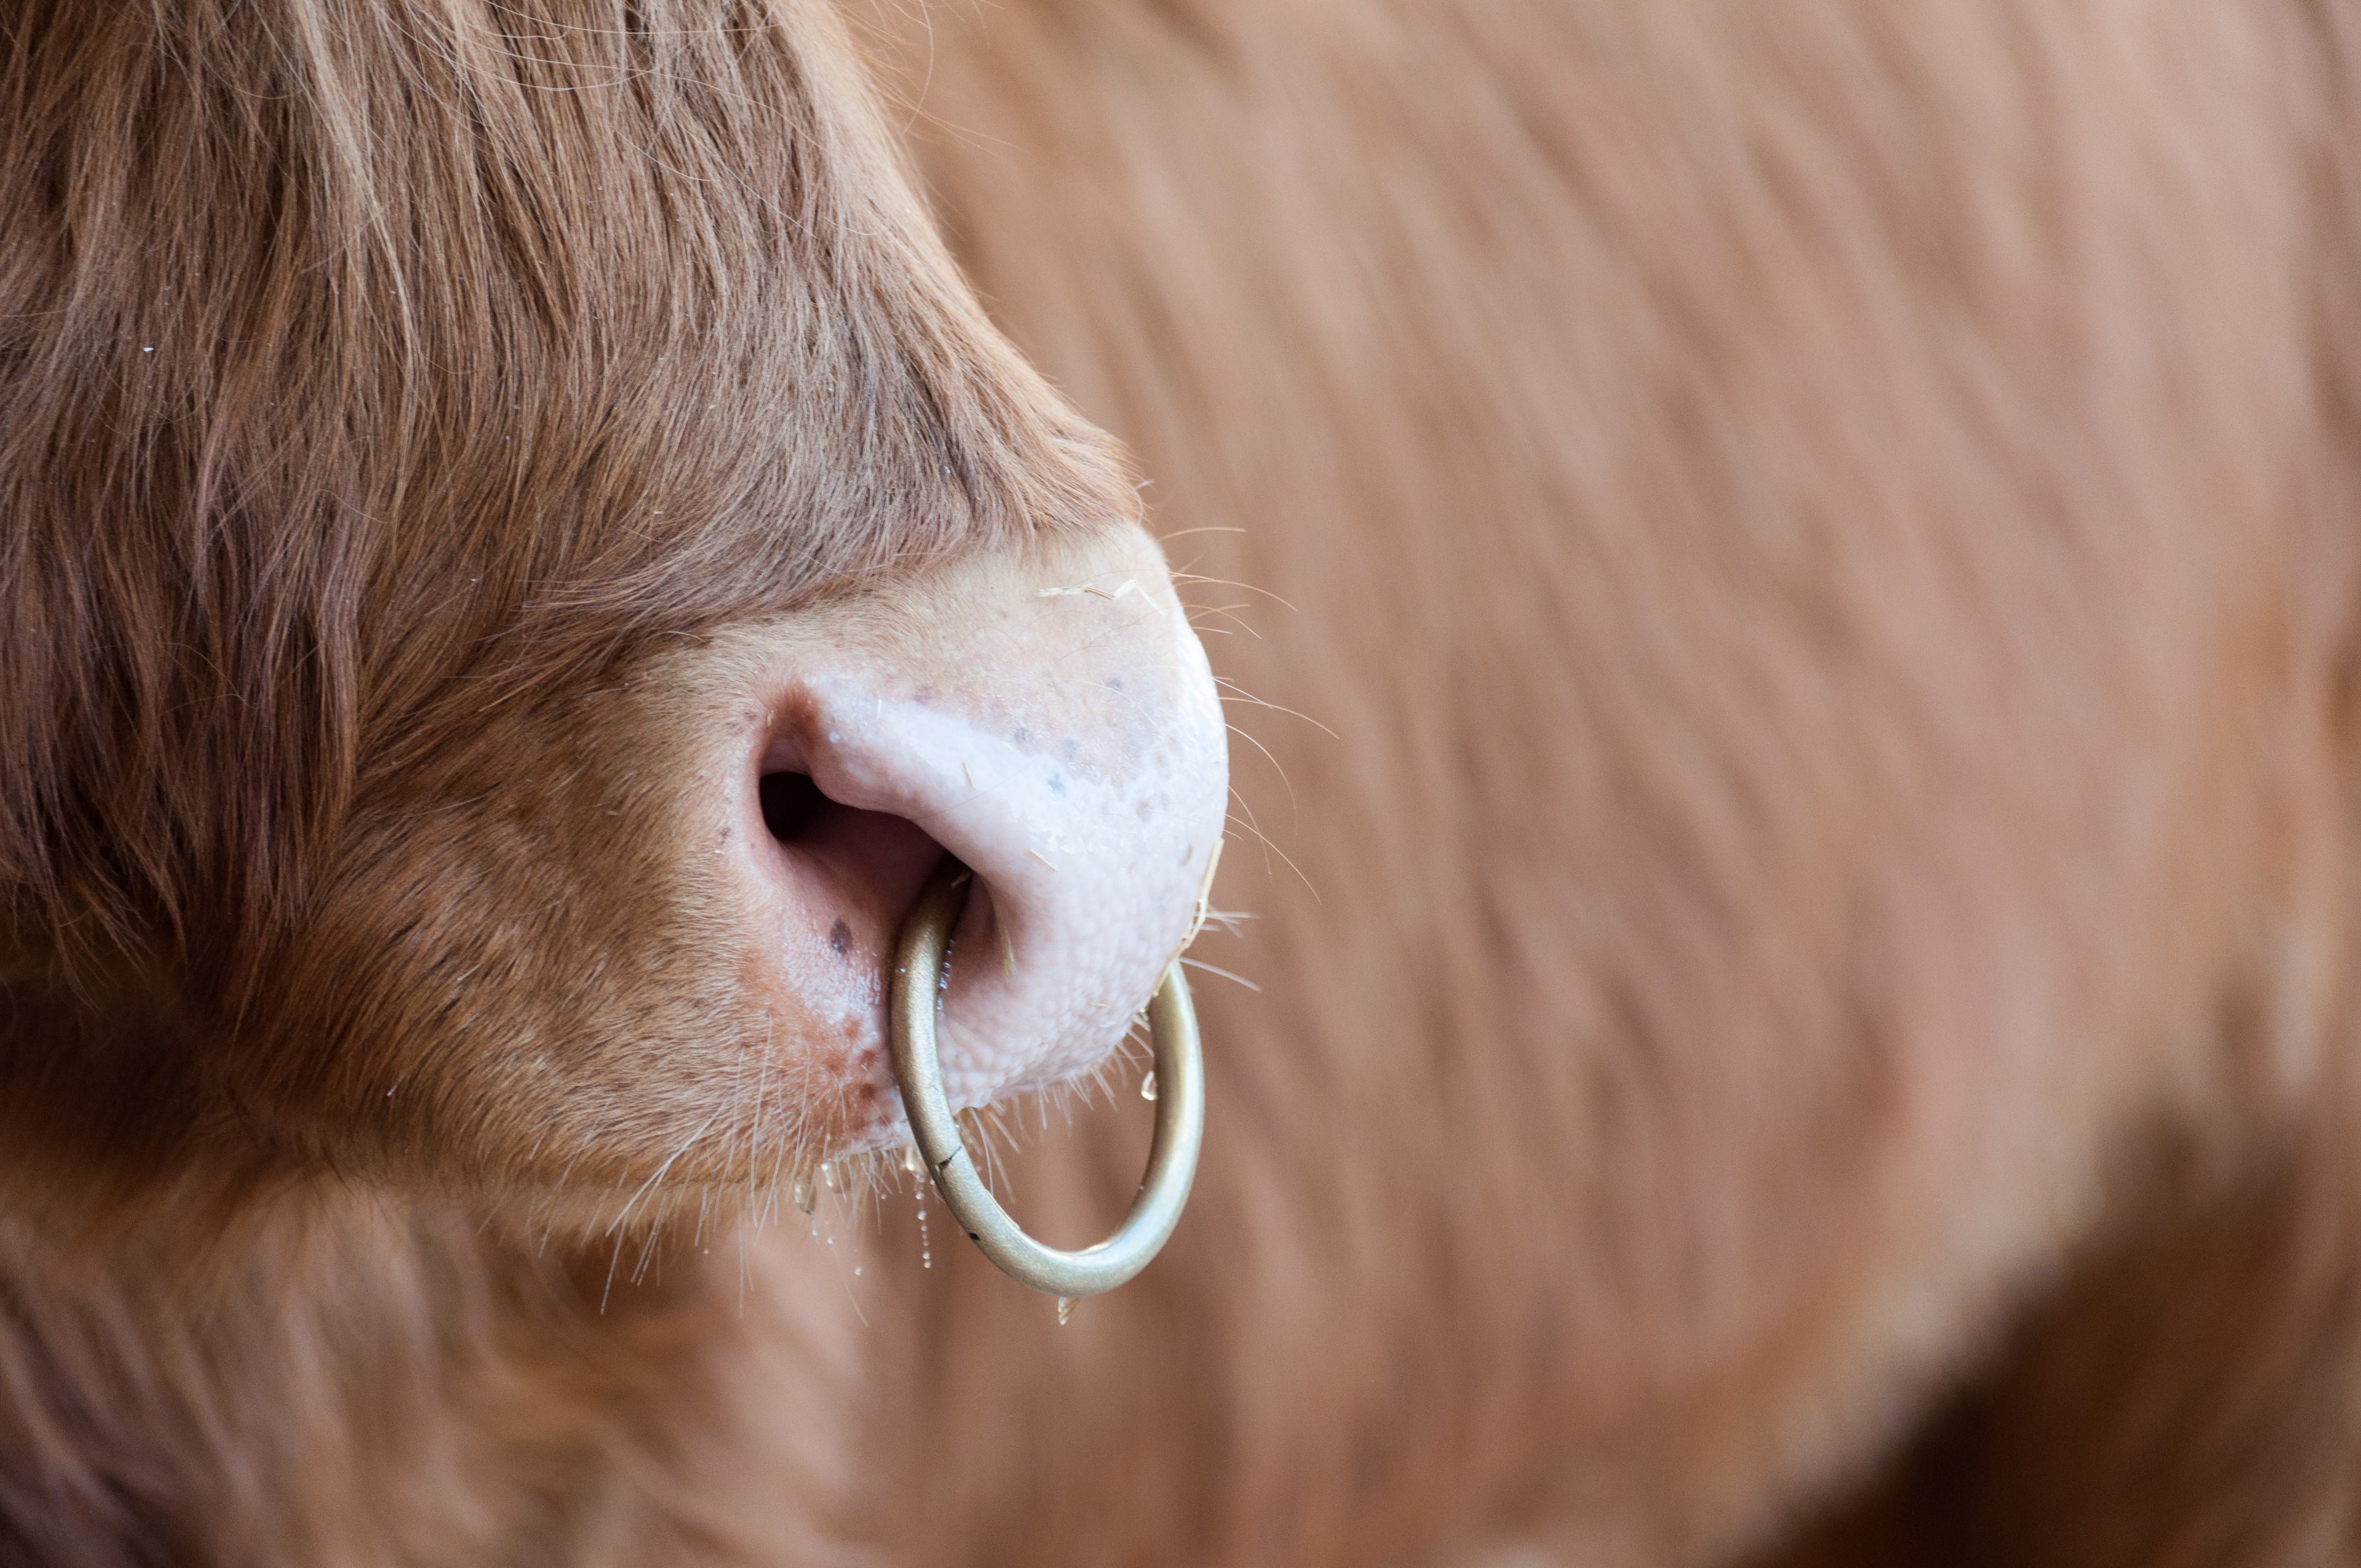 Why Do Bulls Have Nose Rings? vlr.eng.br